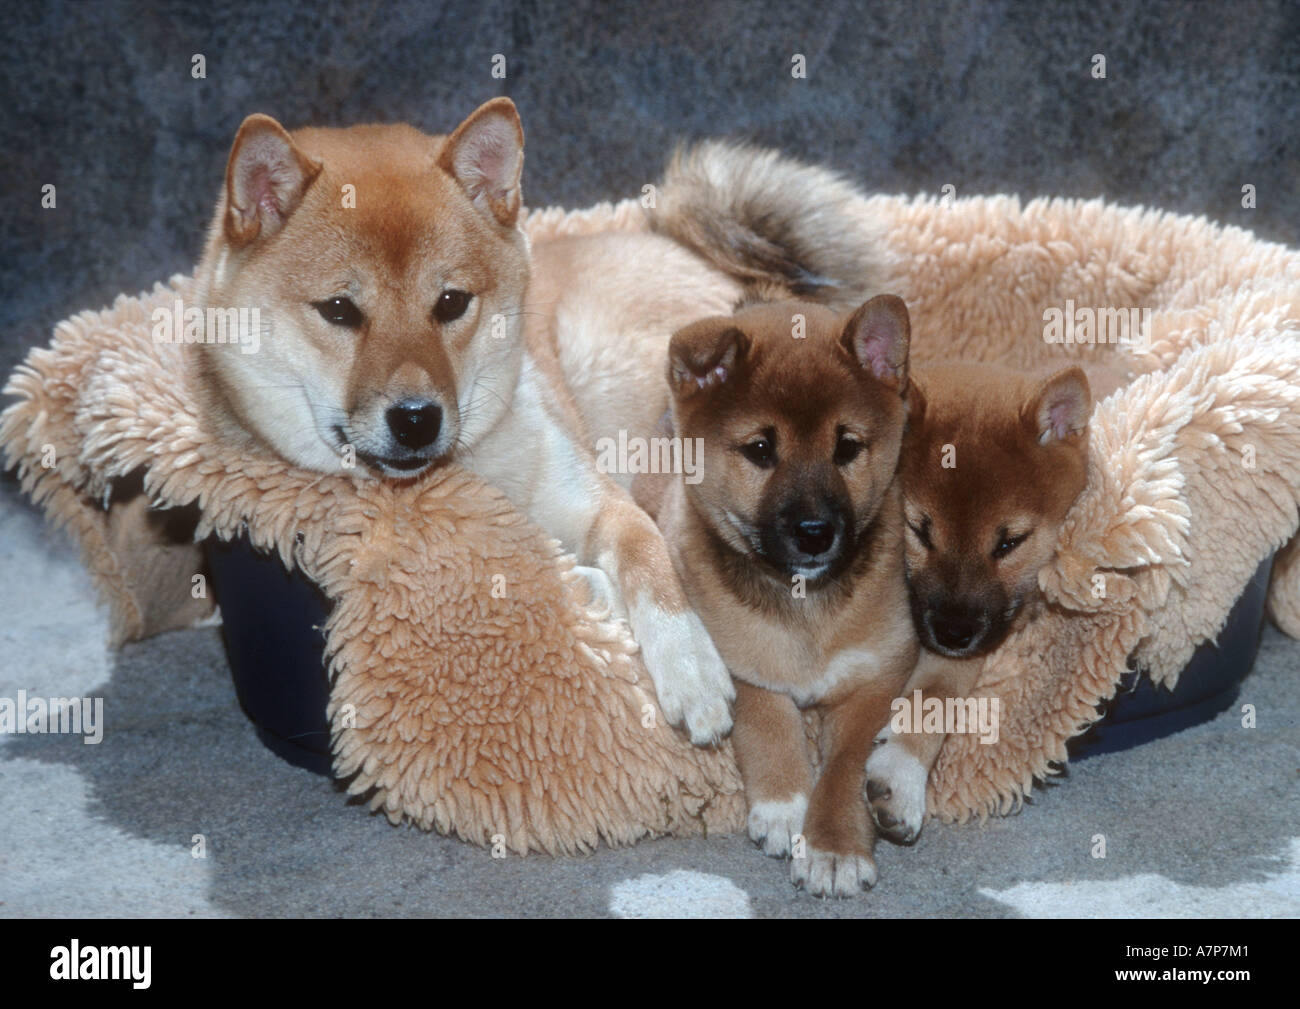 hokkaido ken (Canis lupus f. familiaris), mother with puppies in basket Stock Photo